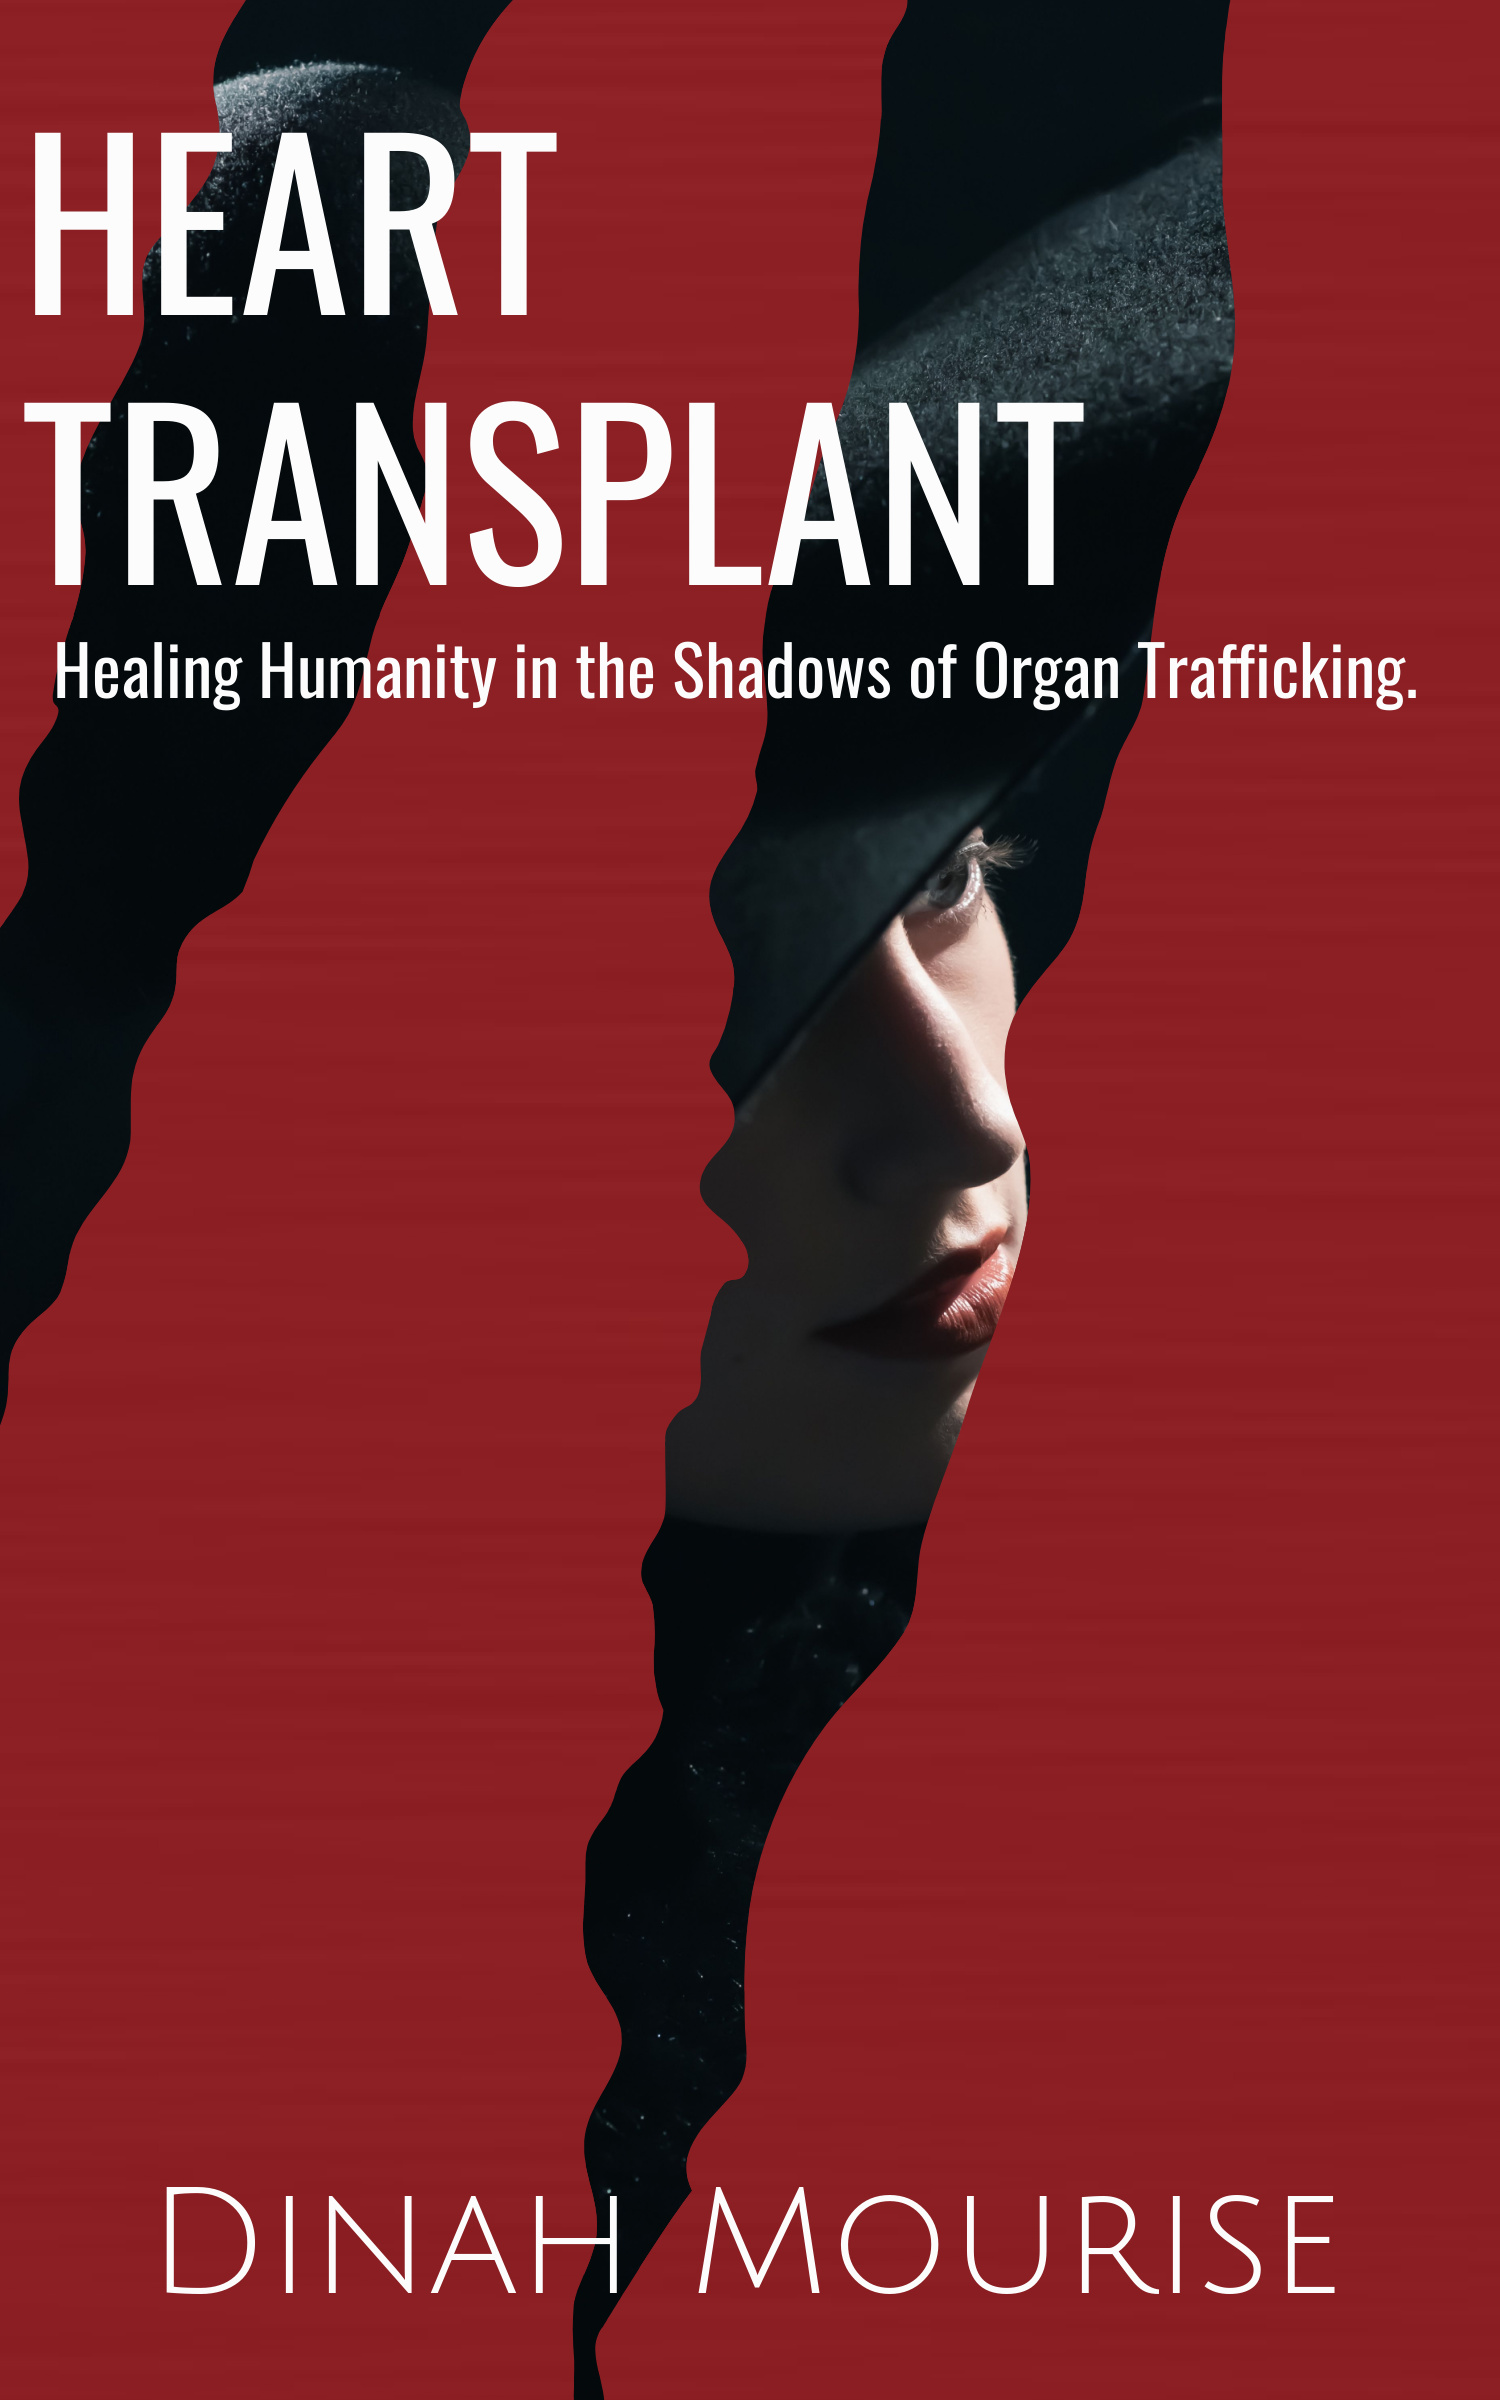 Renowned Producer Maizy James and Chantz Marcus, partners with Dr. Dinah Mourise for Gripping Film Production: Heart Transplant